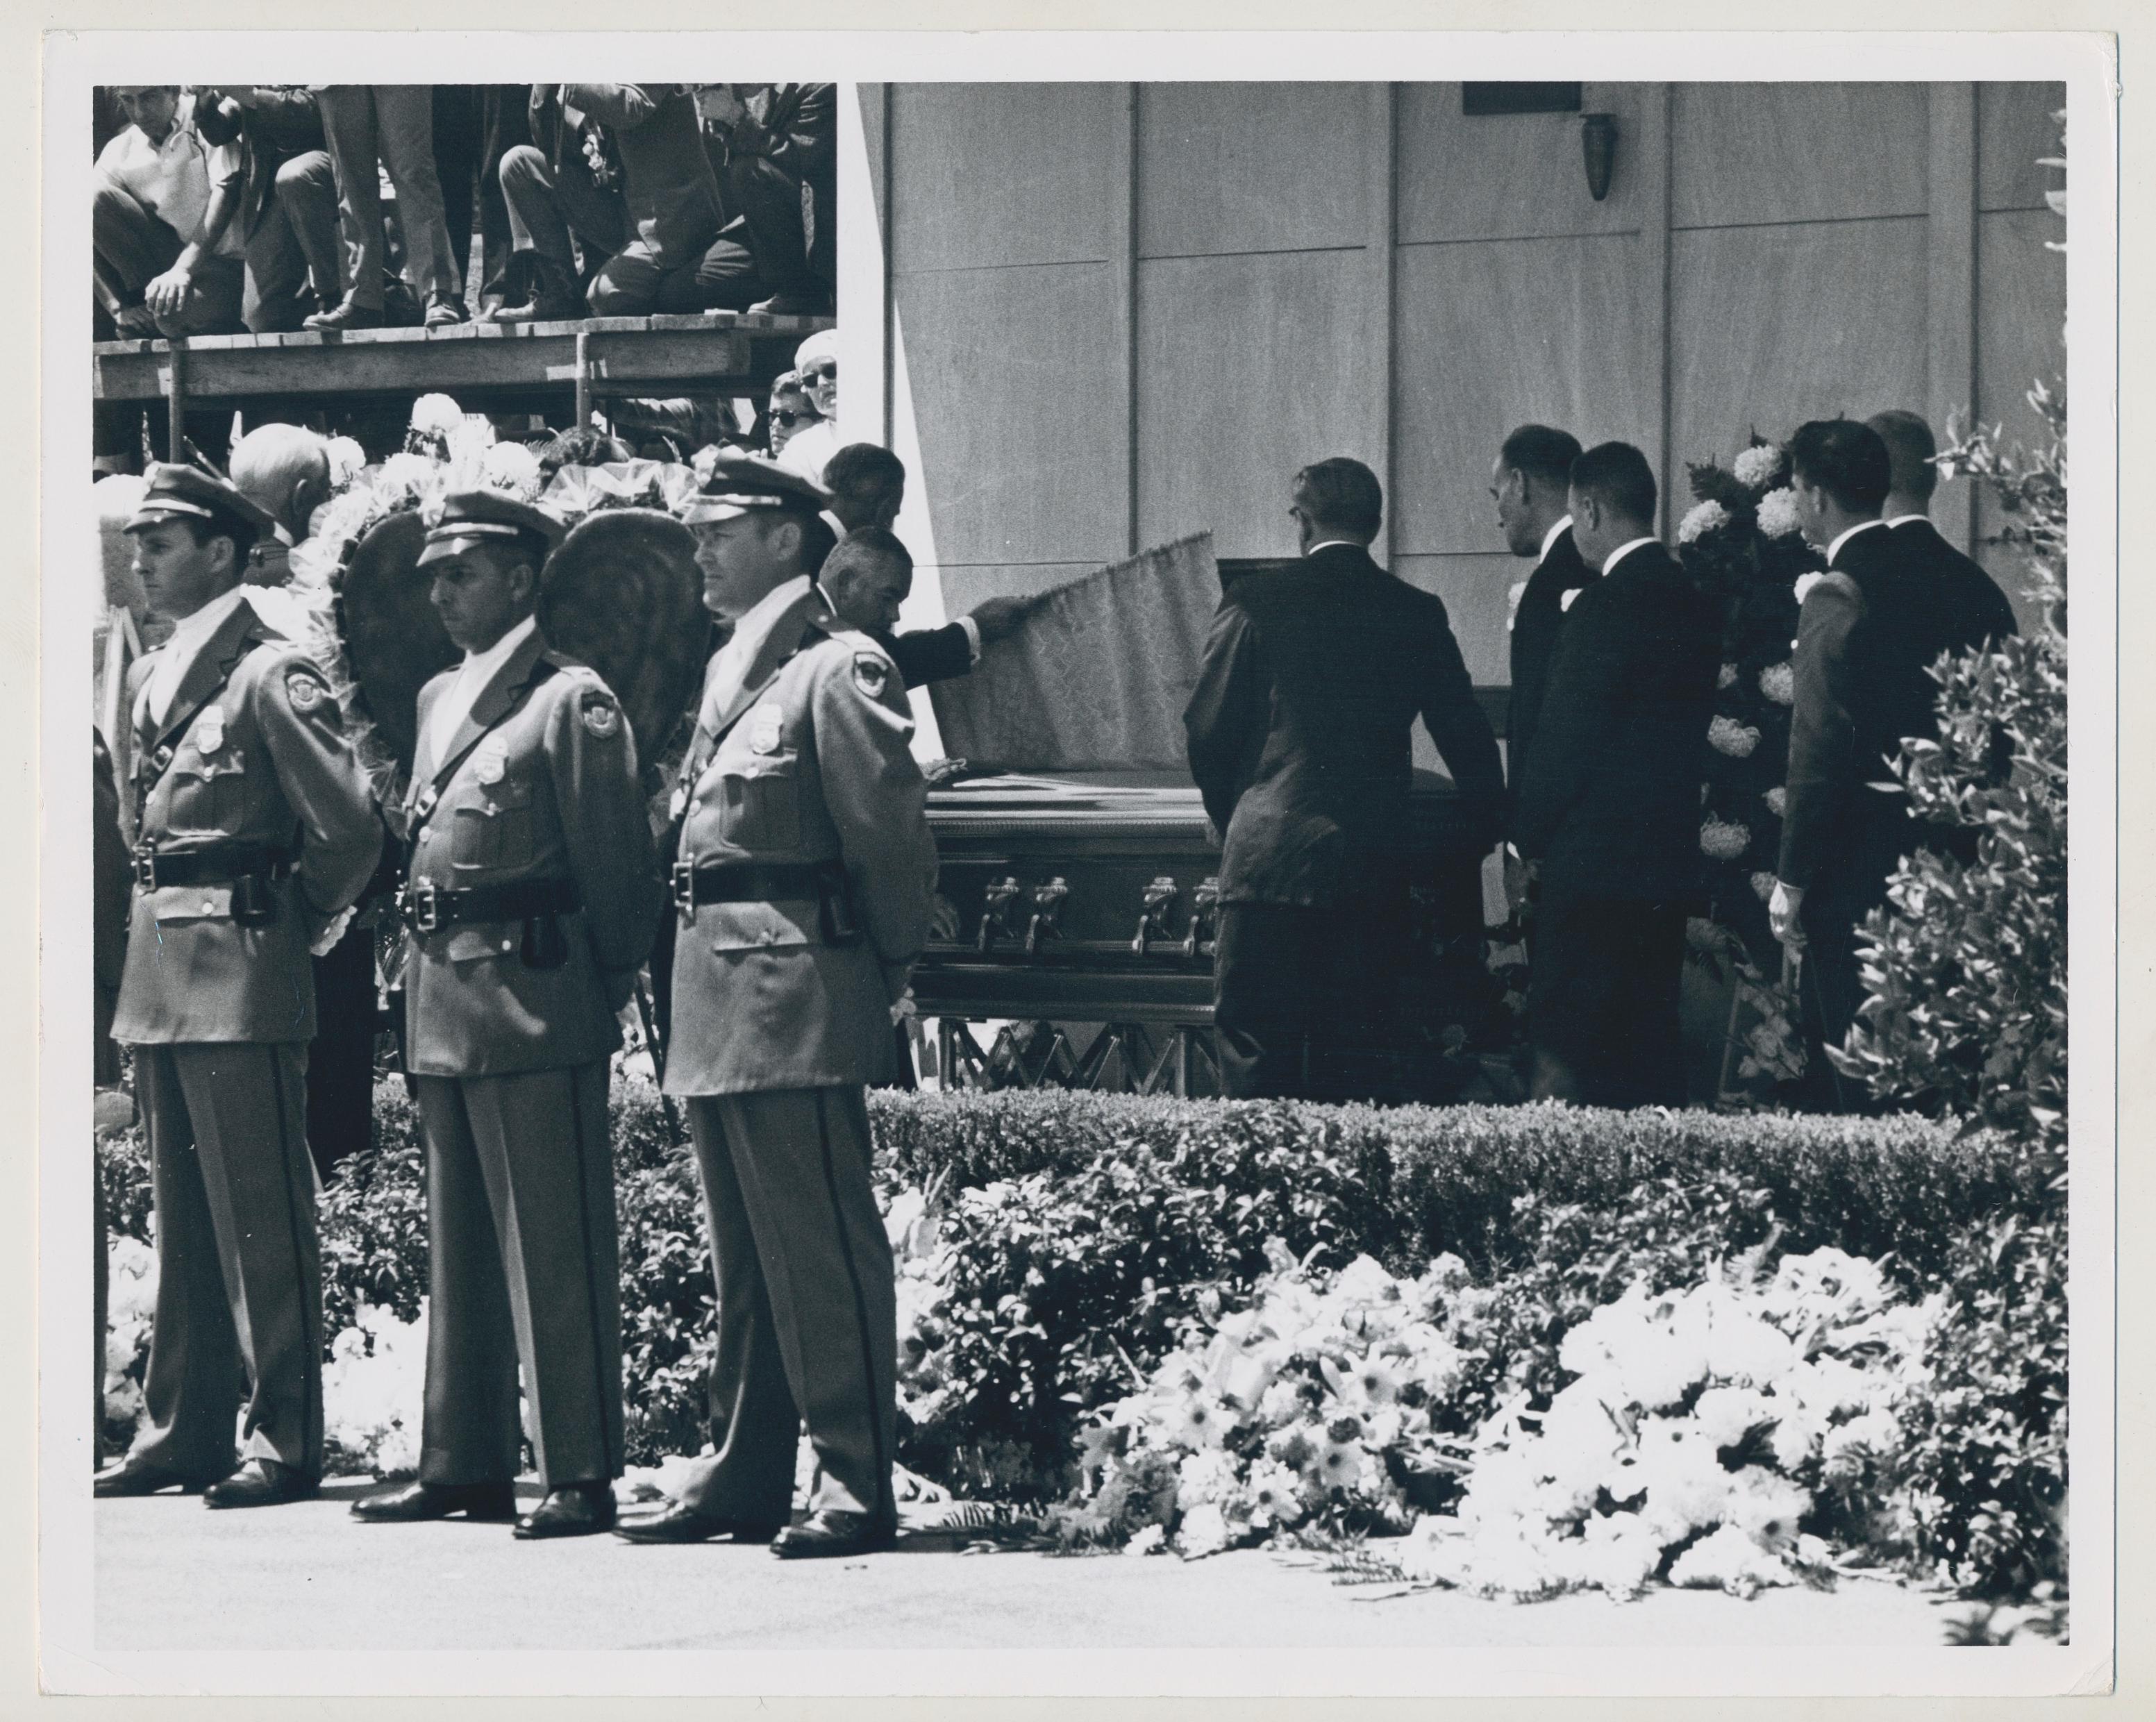 The funeral of Marilyn Monroe, 8th August 1962, 21, 4 x 25, 2 cm - Art by Unknown